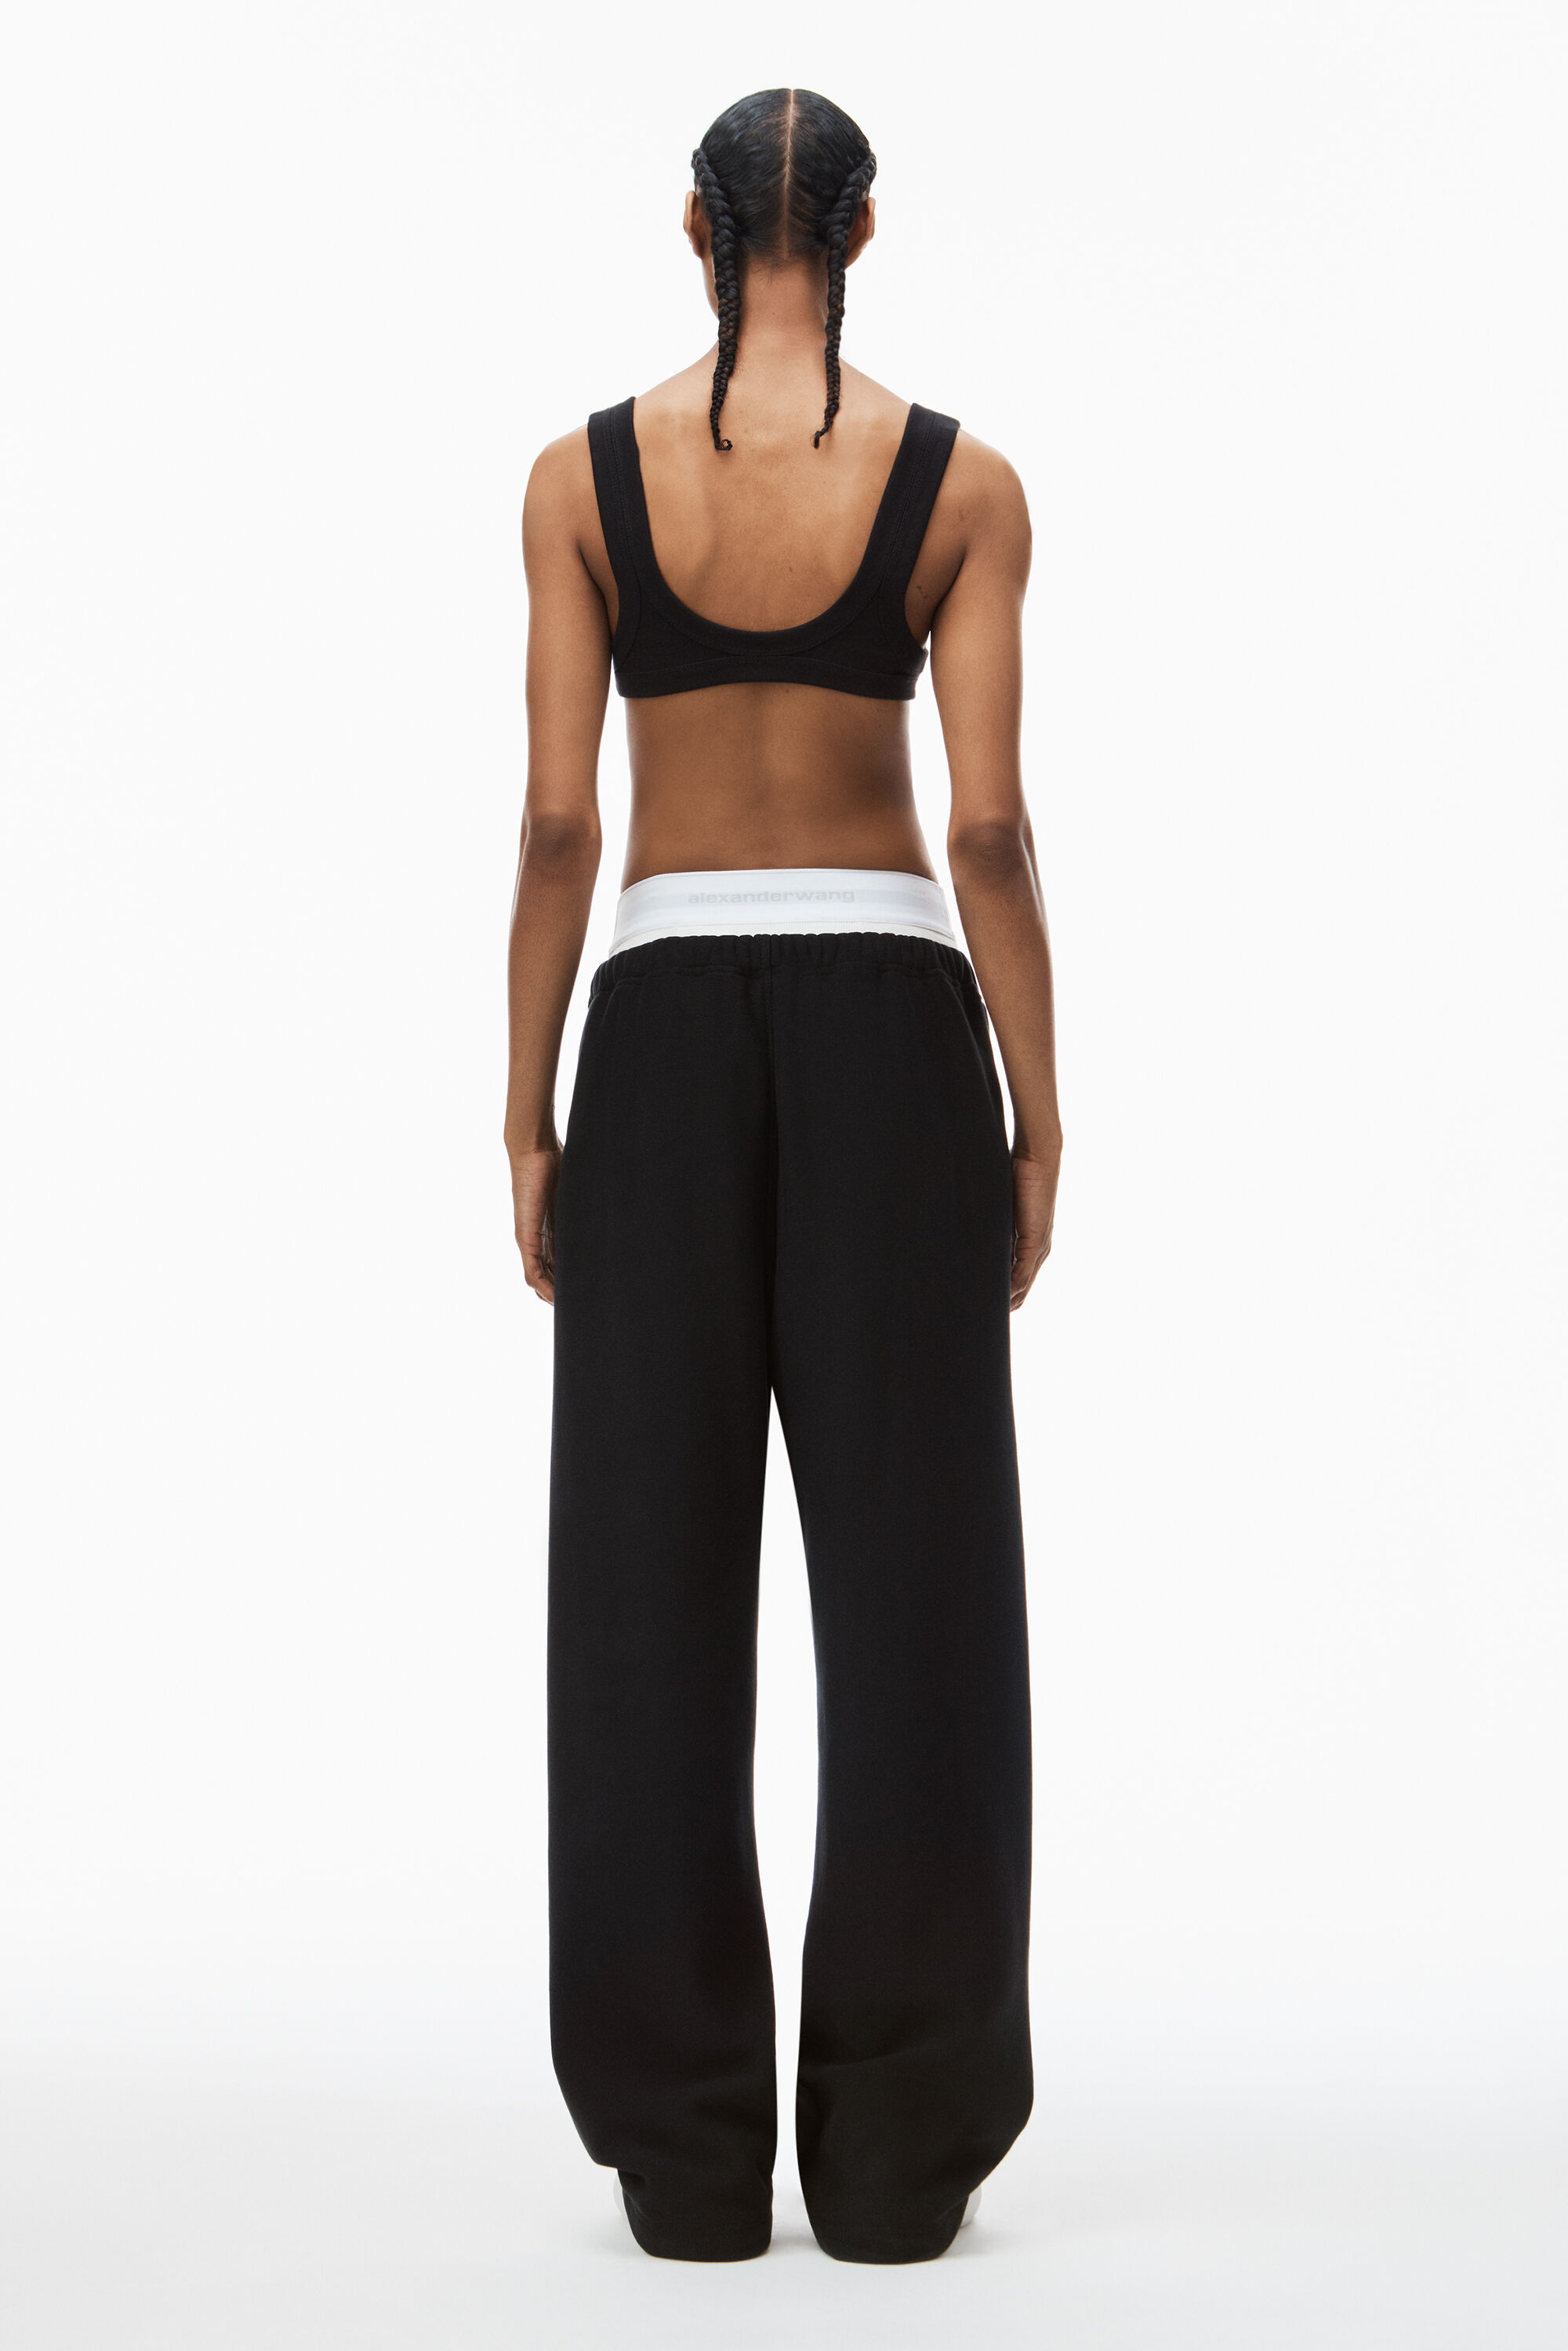 Winioder Wide Leg Sweatpants for Women Elastic High Waisted